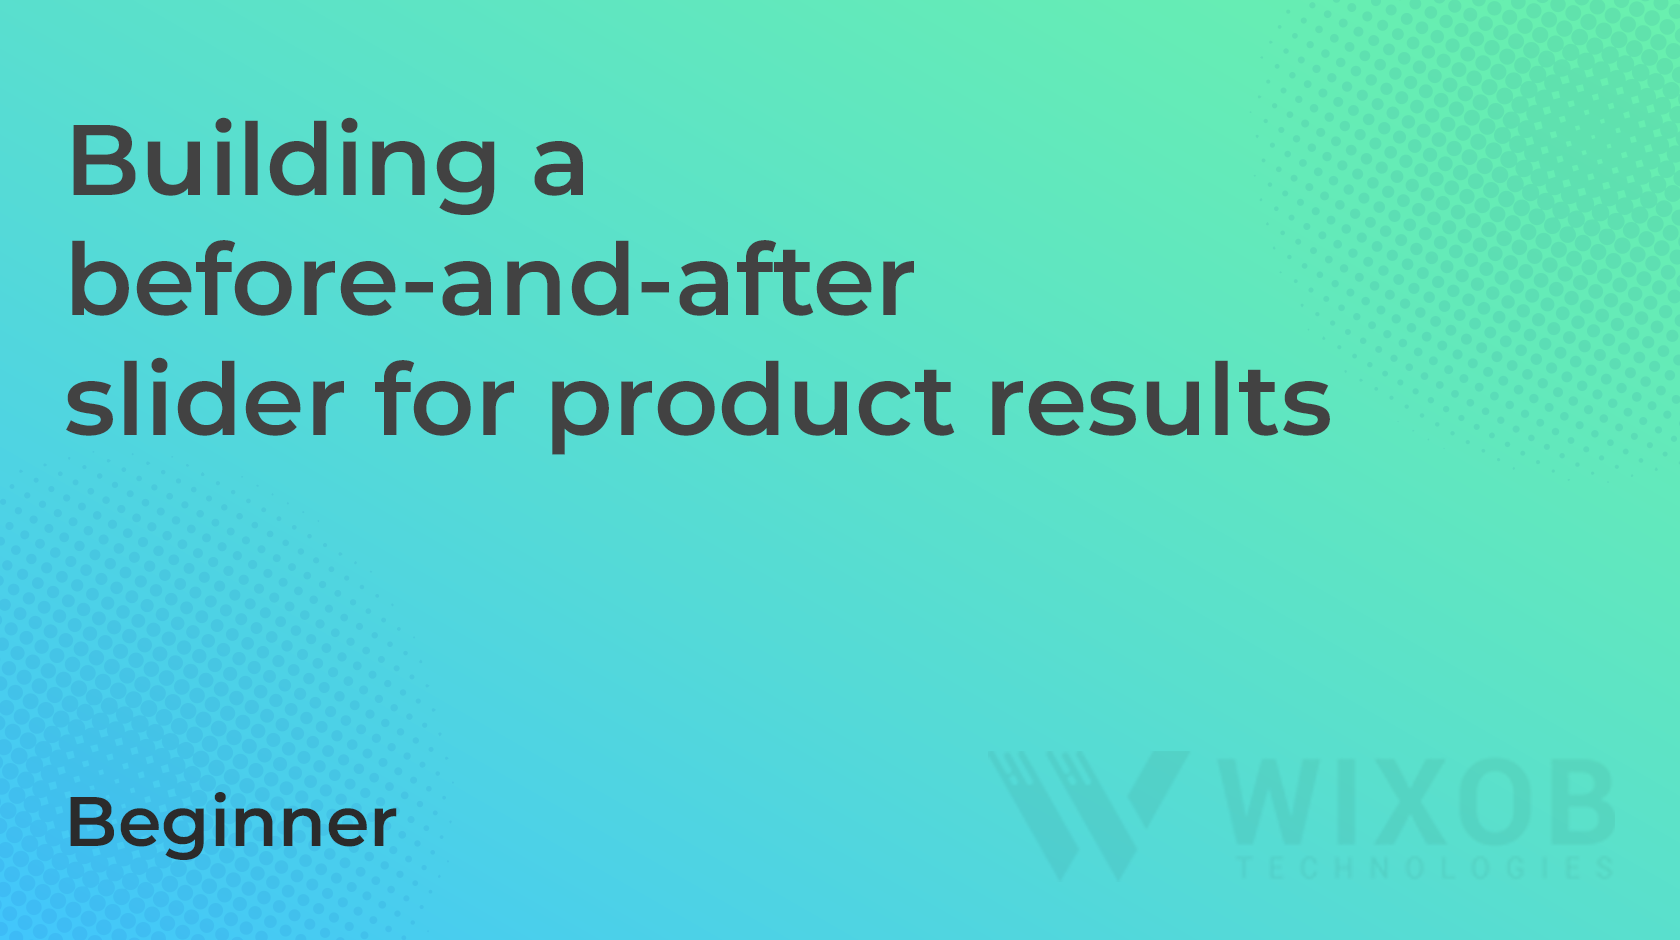 Building a before-and-after slider for product results